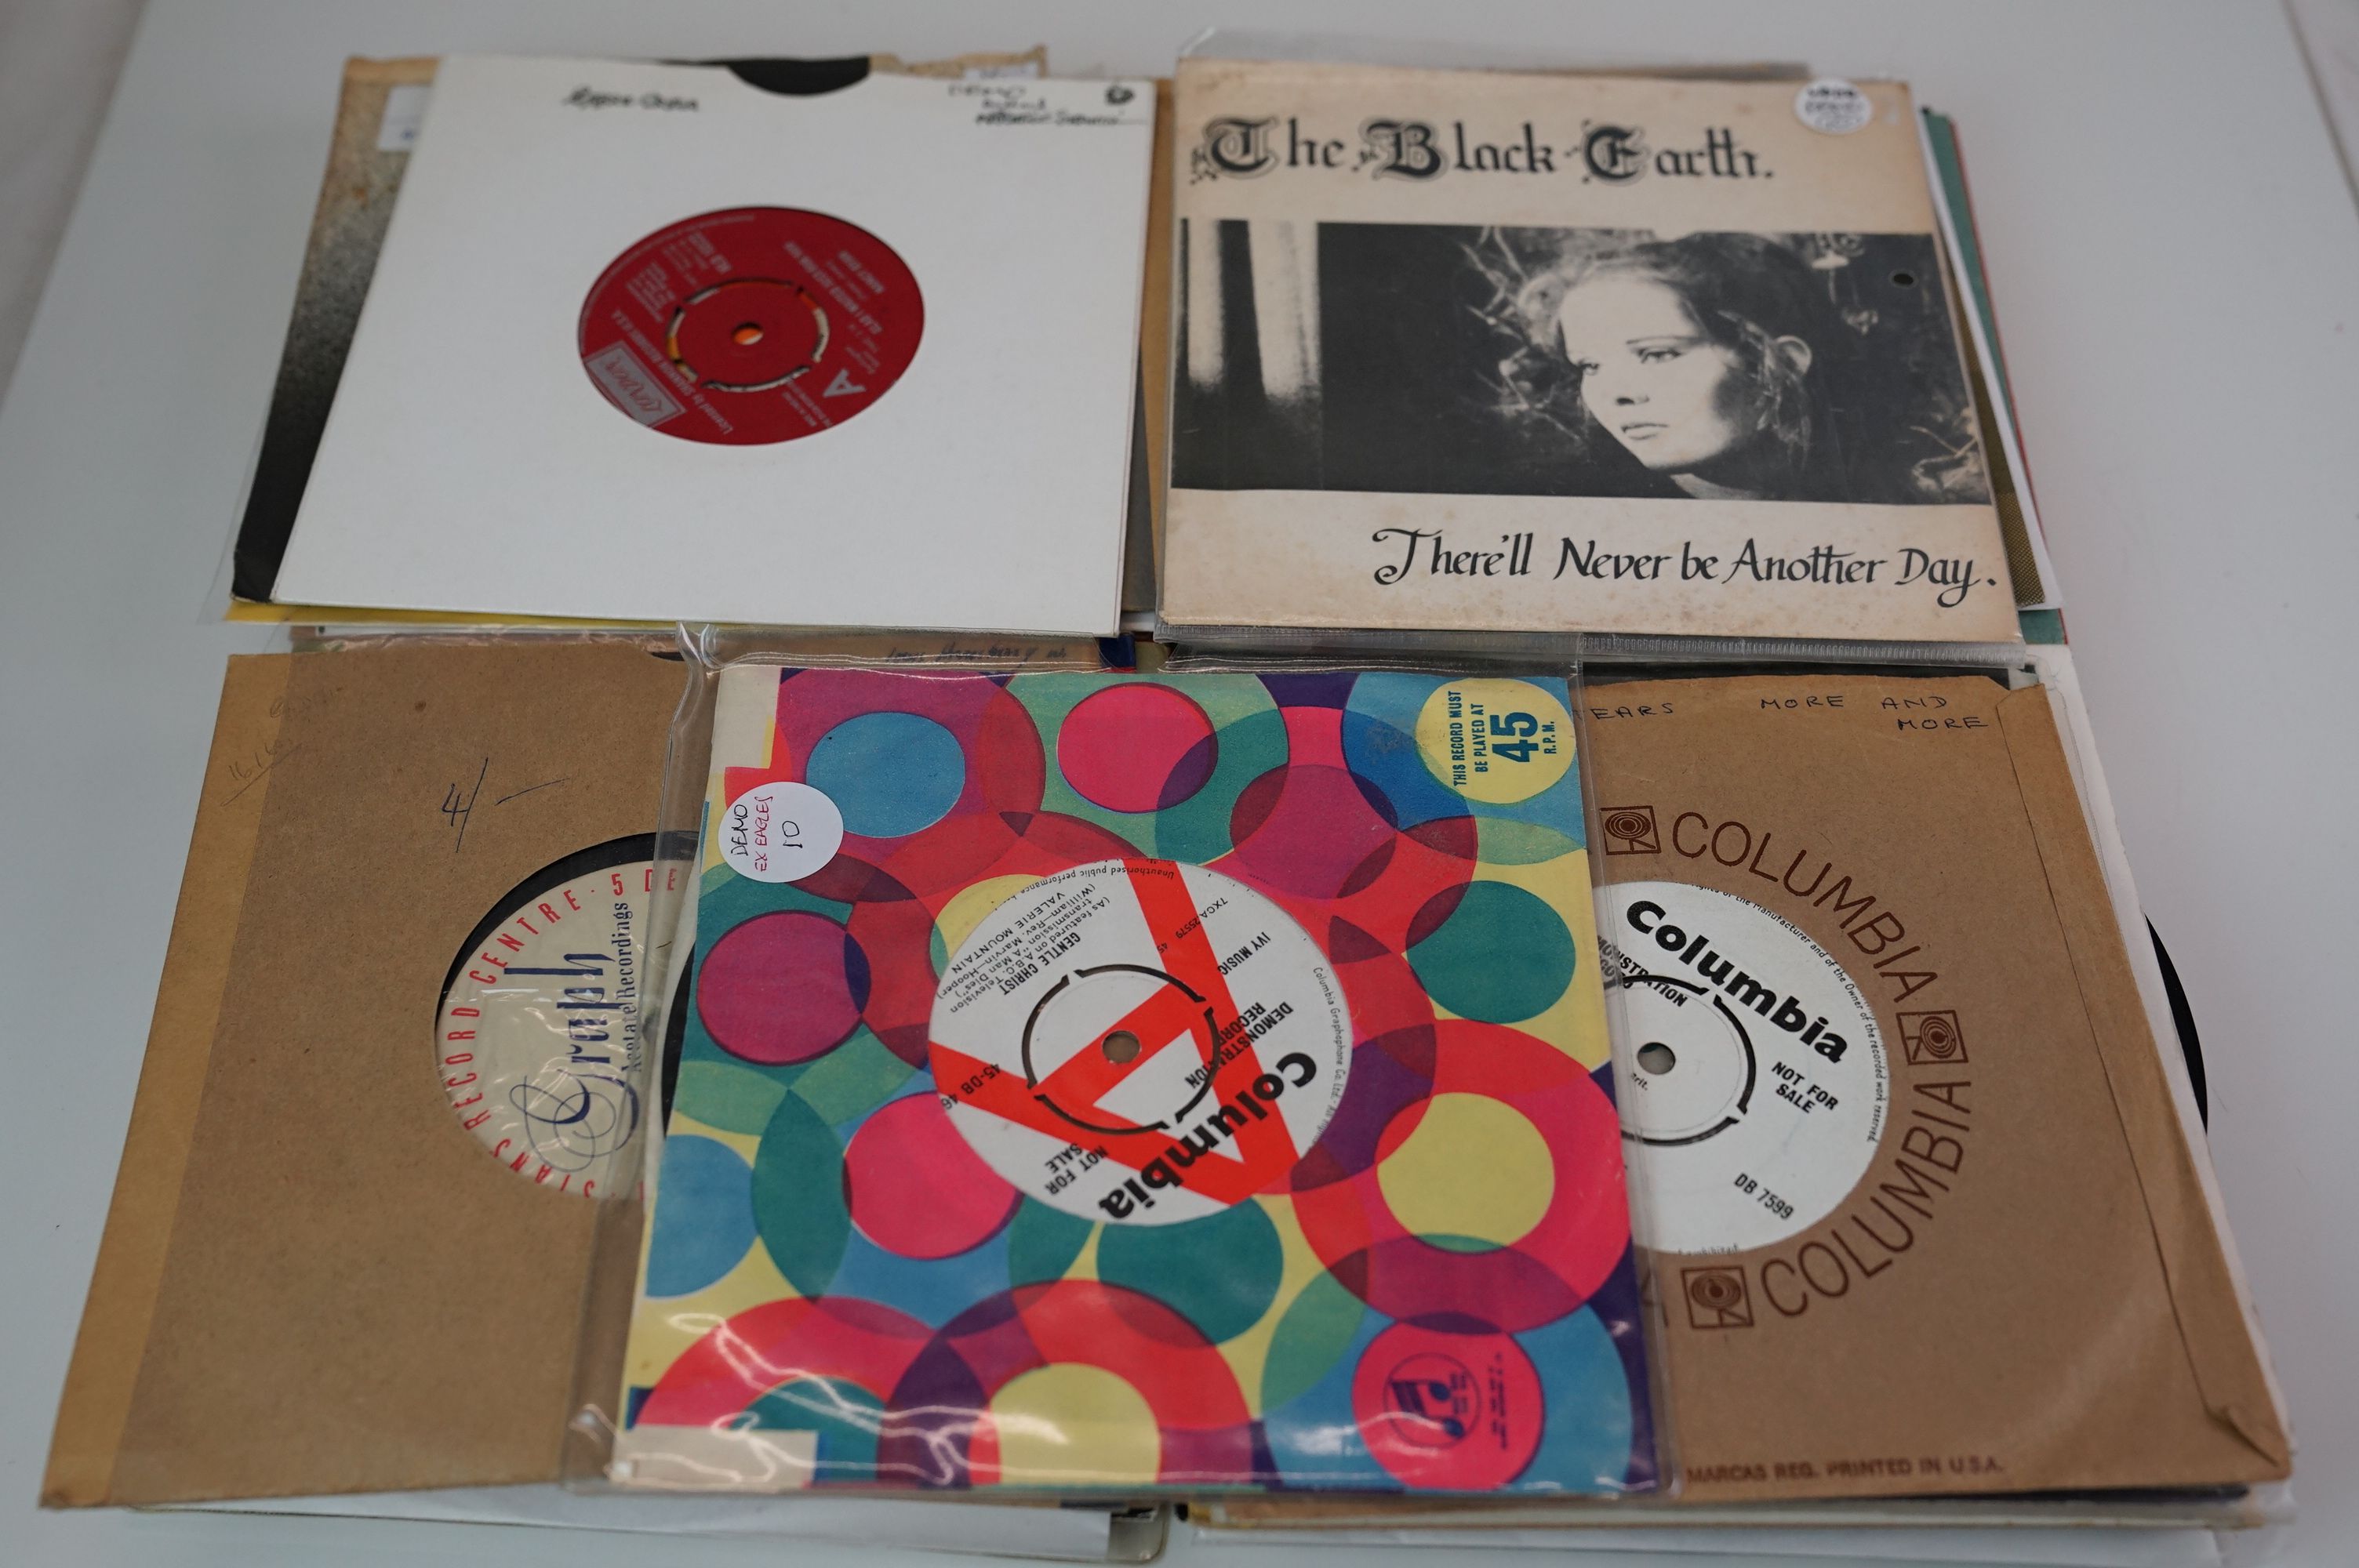 Vinyl - Collection of over 60 Demo & Promo 45s to include Gerry and the Pacemakers, Lisa Stansfield, - Image 18 of 18